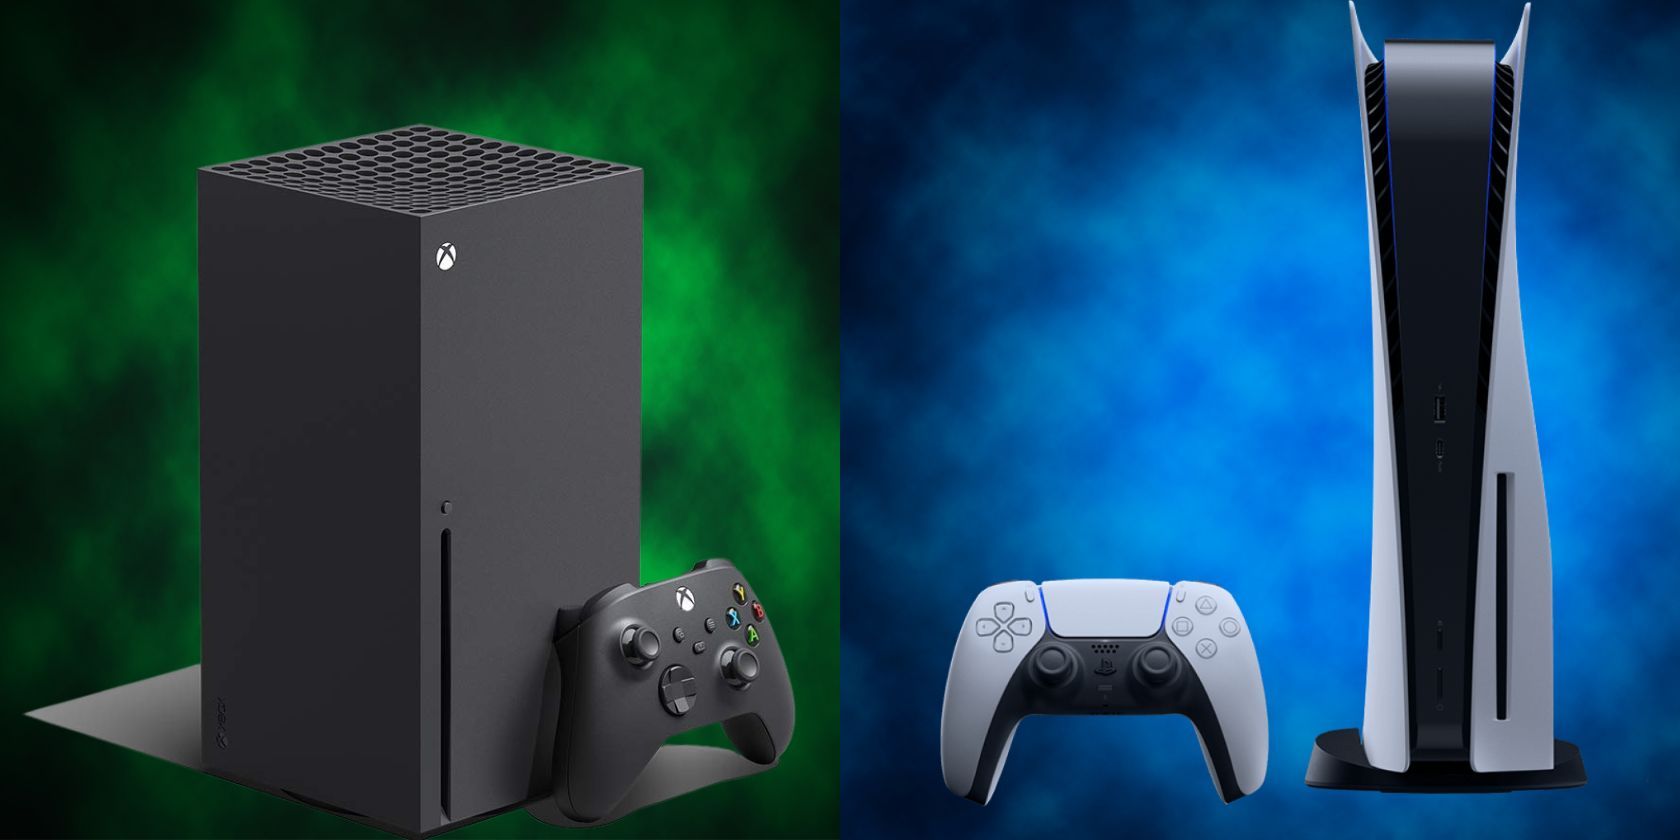 PS5 Vs. Xbox Series X: Which One Is Better?